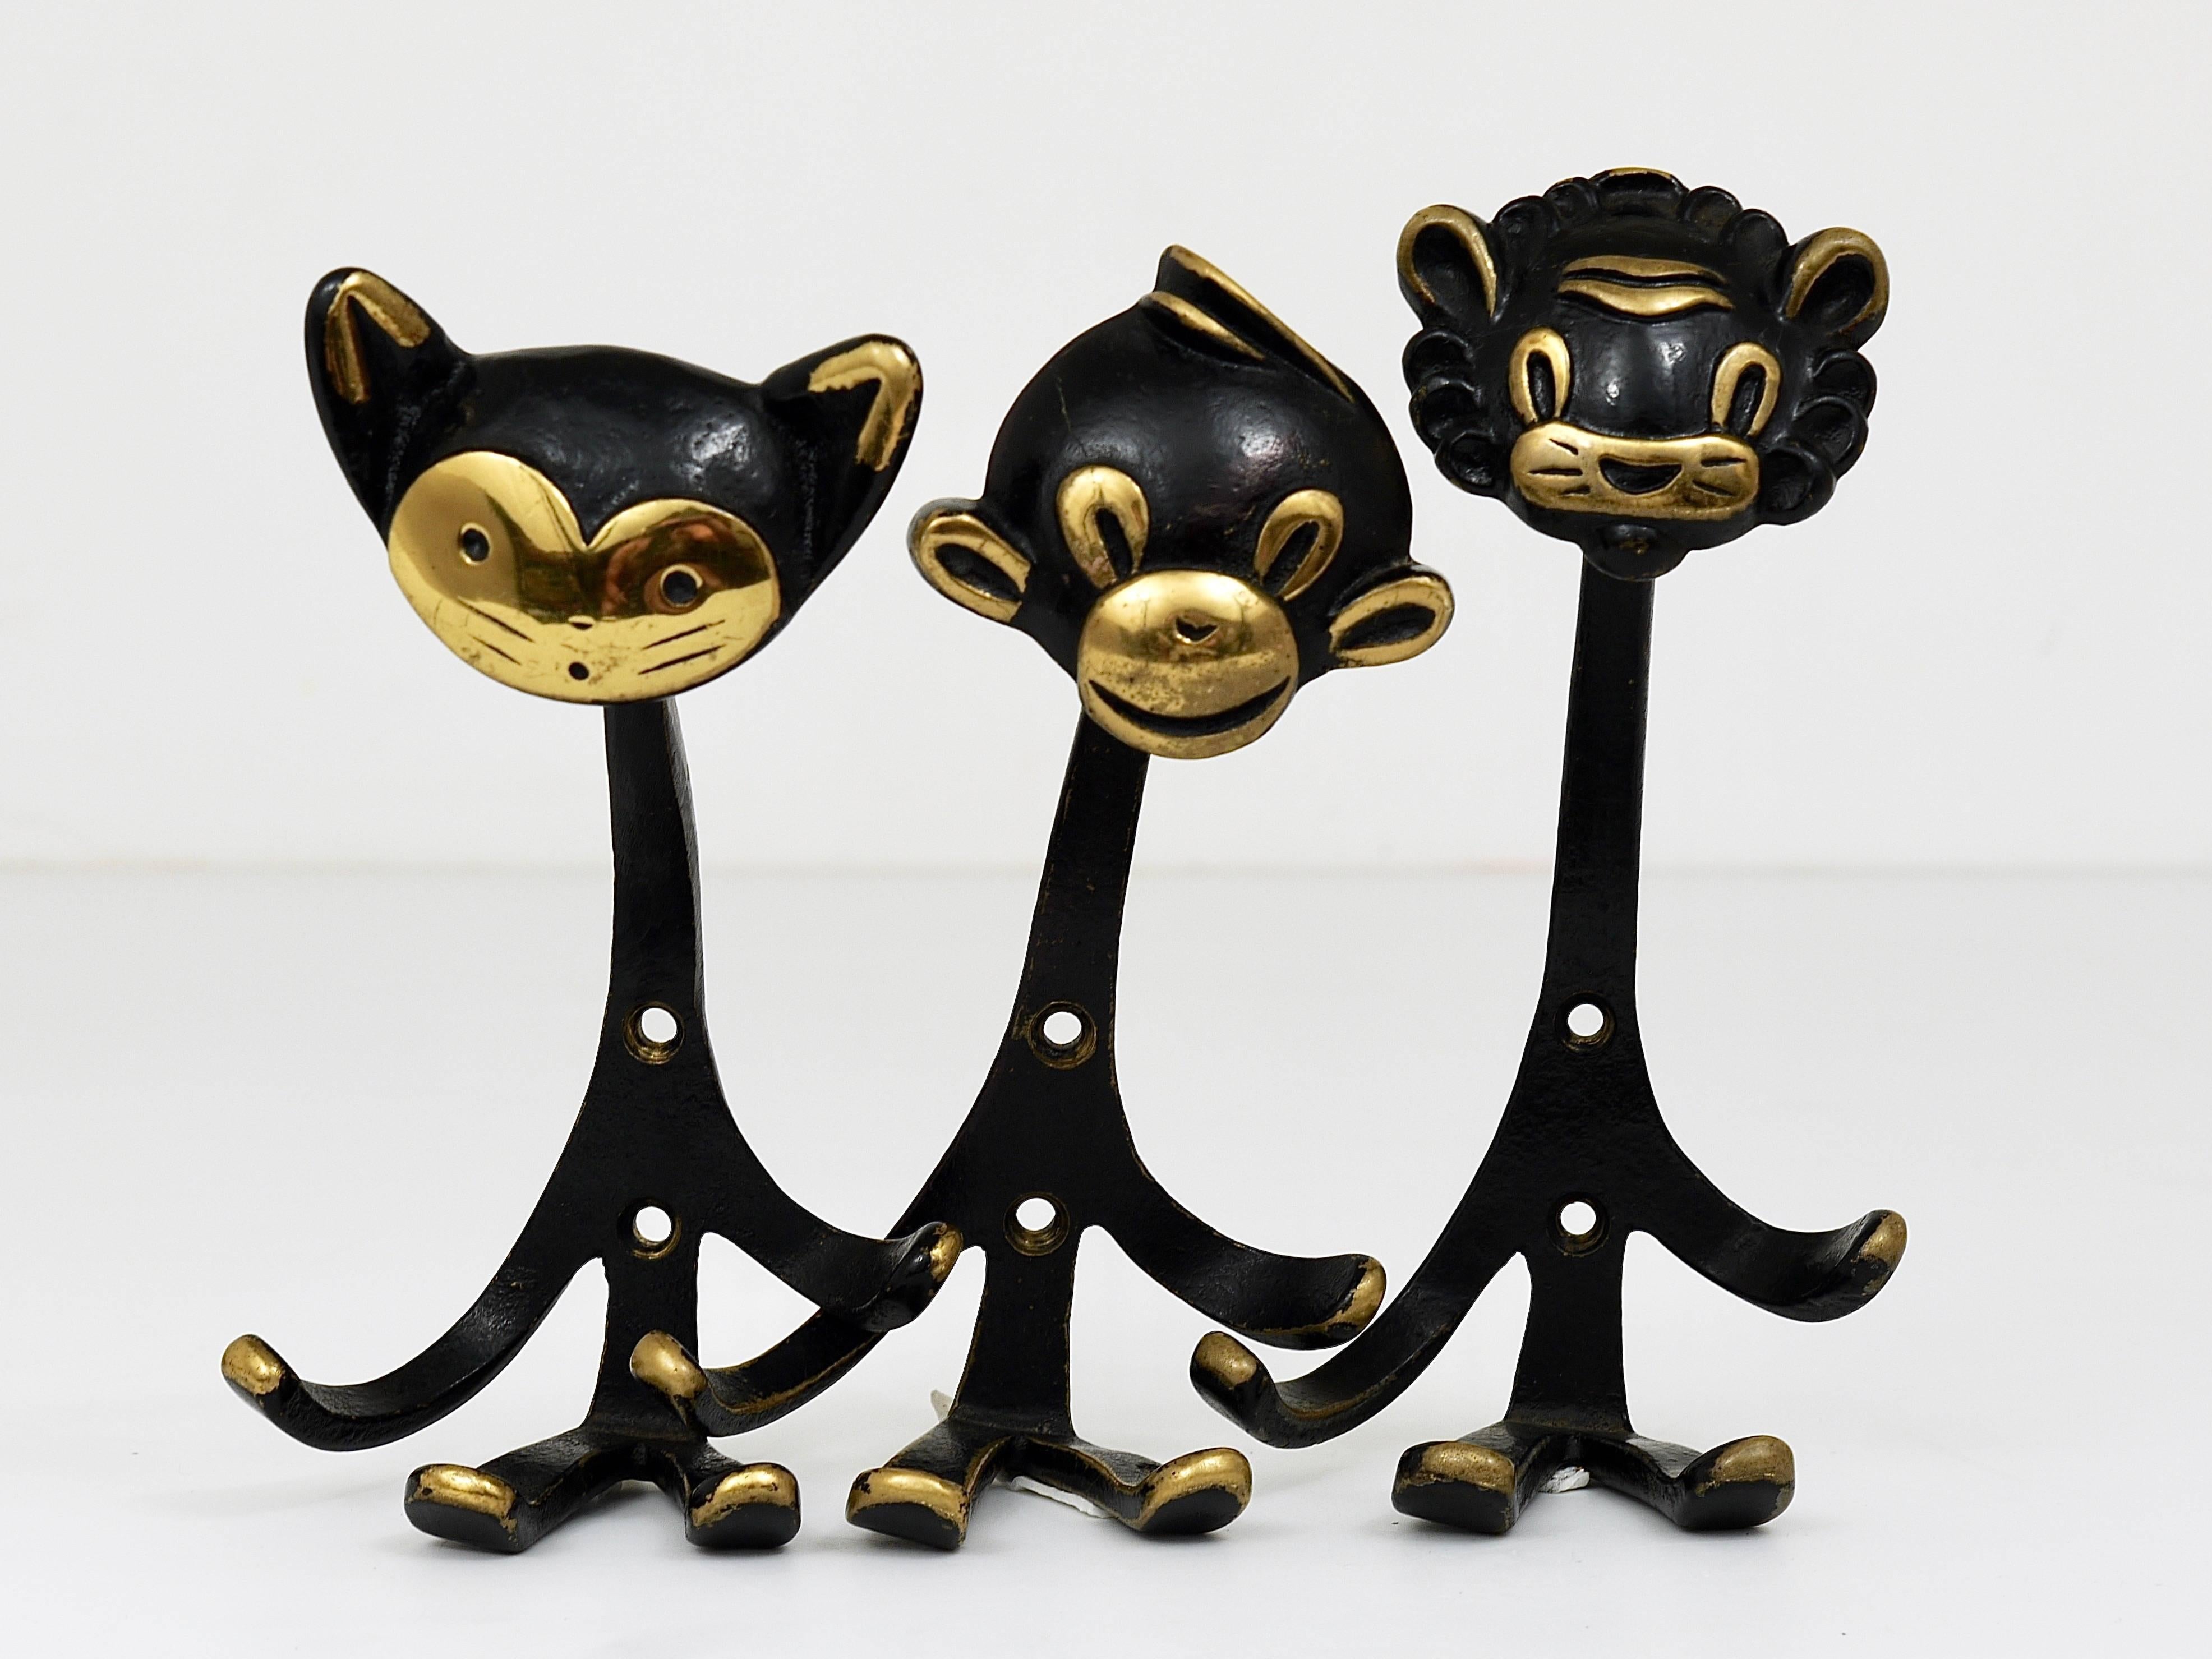 A set of three Mid-Century brass wall coat hooks, displaying a cat, a lion and a monkey. A very humorous design by Walter Bosse, executed by Hertha Baller Austria in the 1950s. Made of black finished brass. In good condition with nice patina. Each